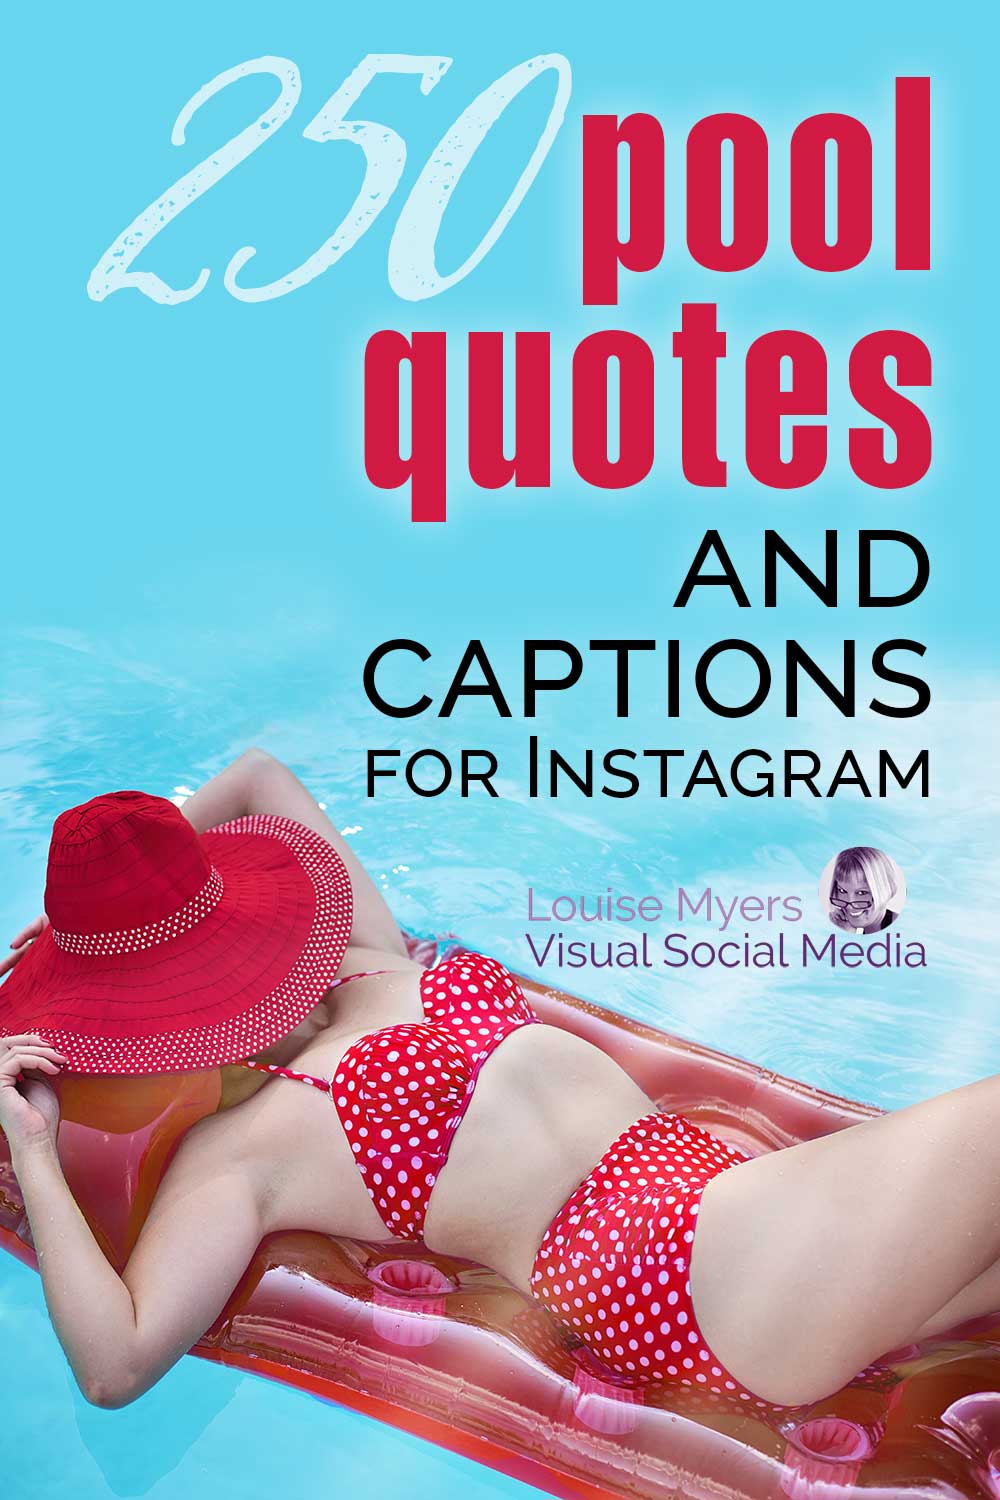 woman in red bikini floating in pool with text 250 Pool Quotes & Captions for Instagram.